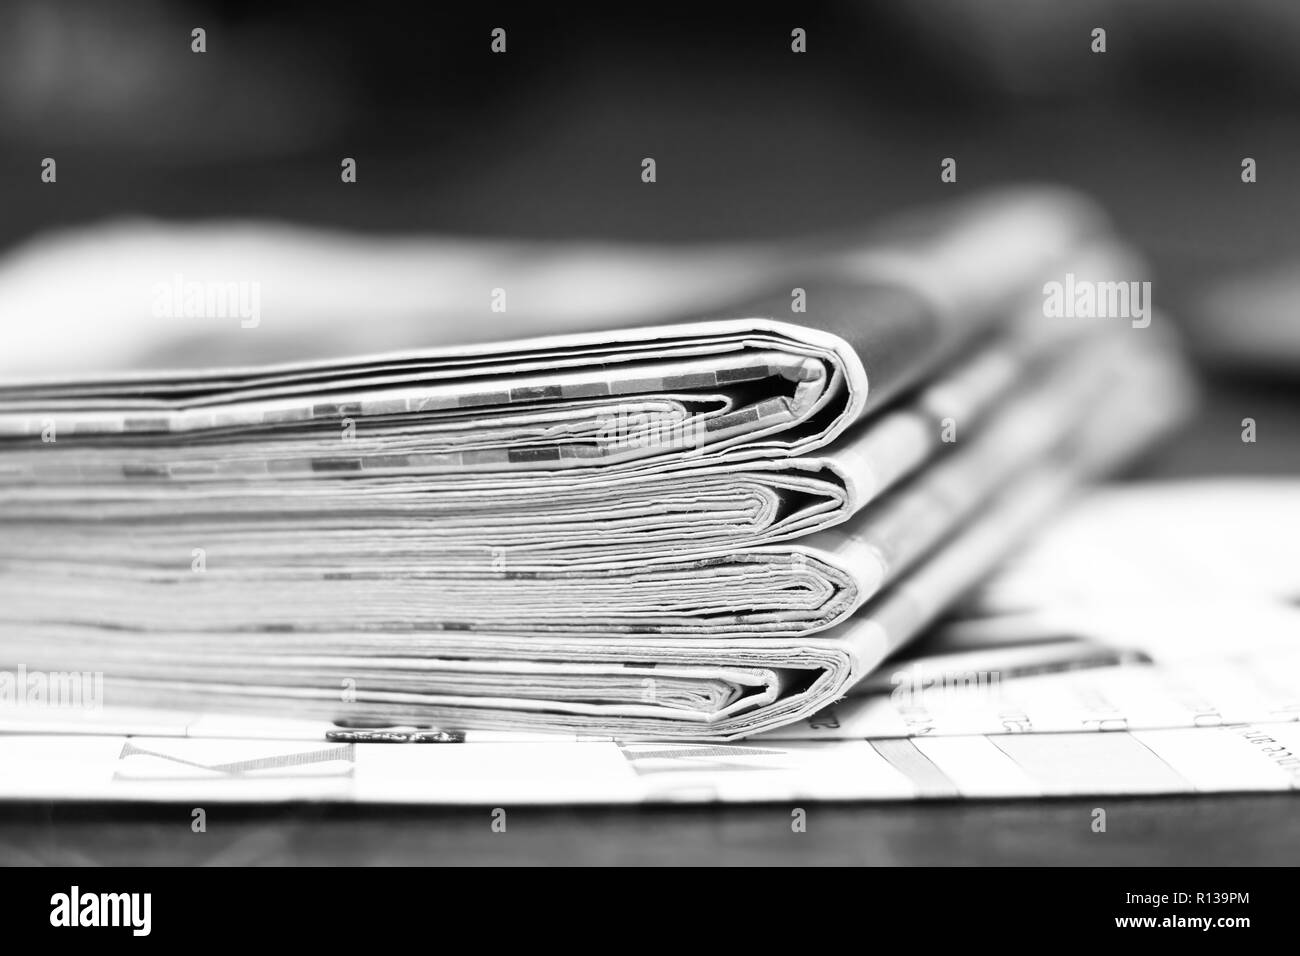 Pile of fresh morning newspapers on table at office. Latest financial and business news in daily paper. Pages with information (headlines, articles) Stock Photo